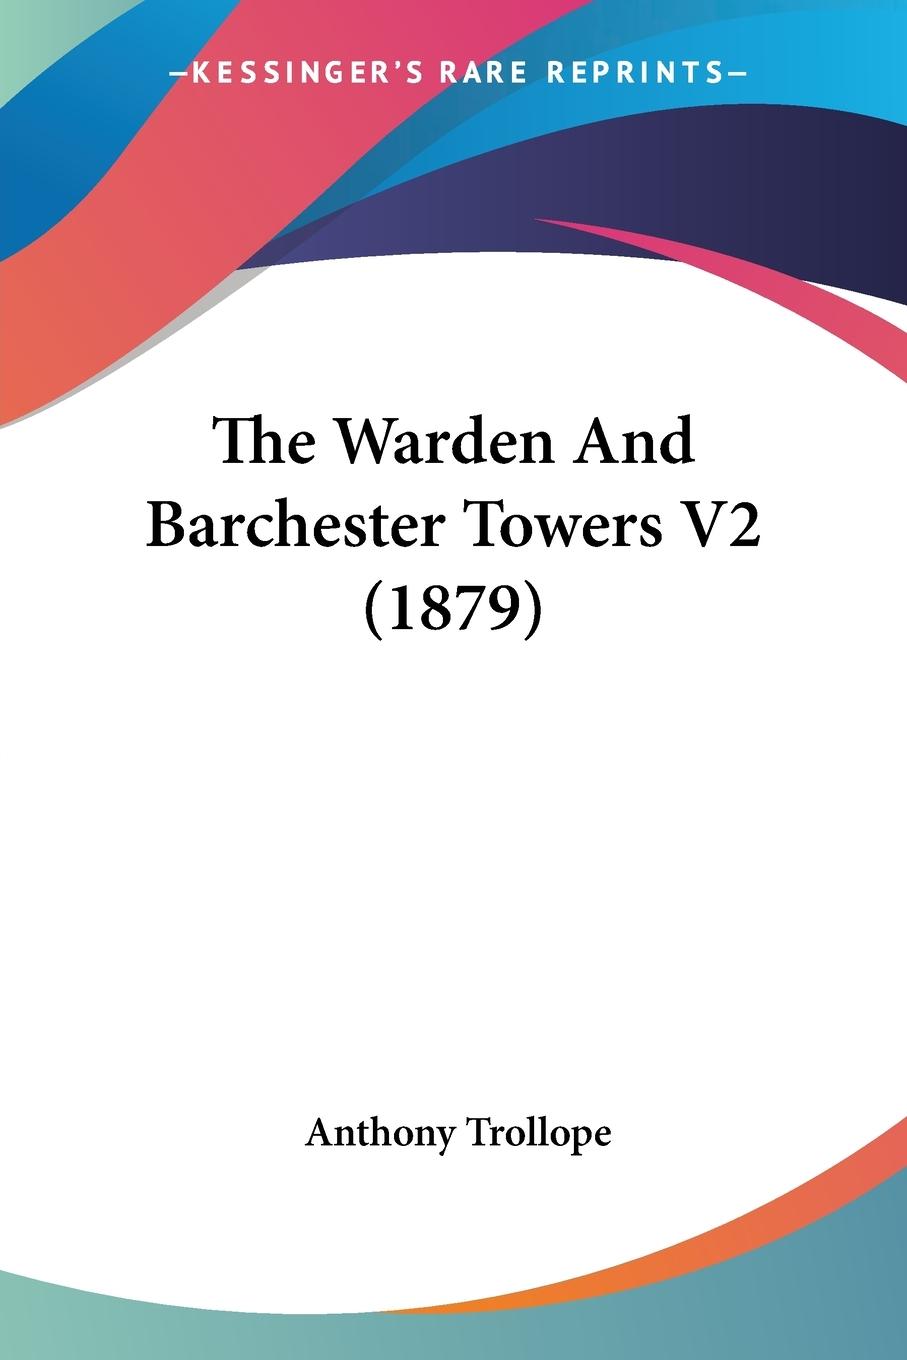 The Warden And Barchester Towers V2 (1879) | Anthony Trollope | Taschenbuch | Paperback | Englisch | 2009 | Kessinger Publishing, LLC | EAN 9781120342171 - Trollope, Anthony